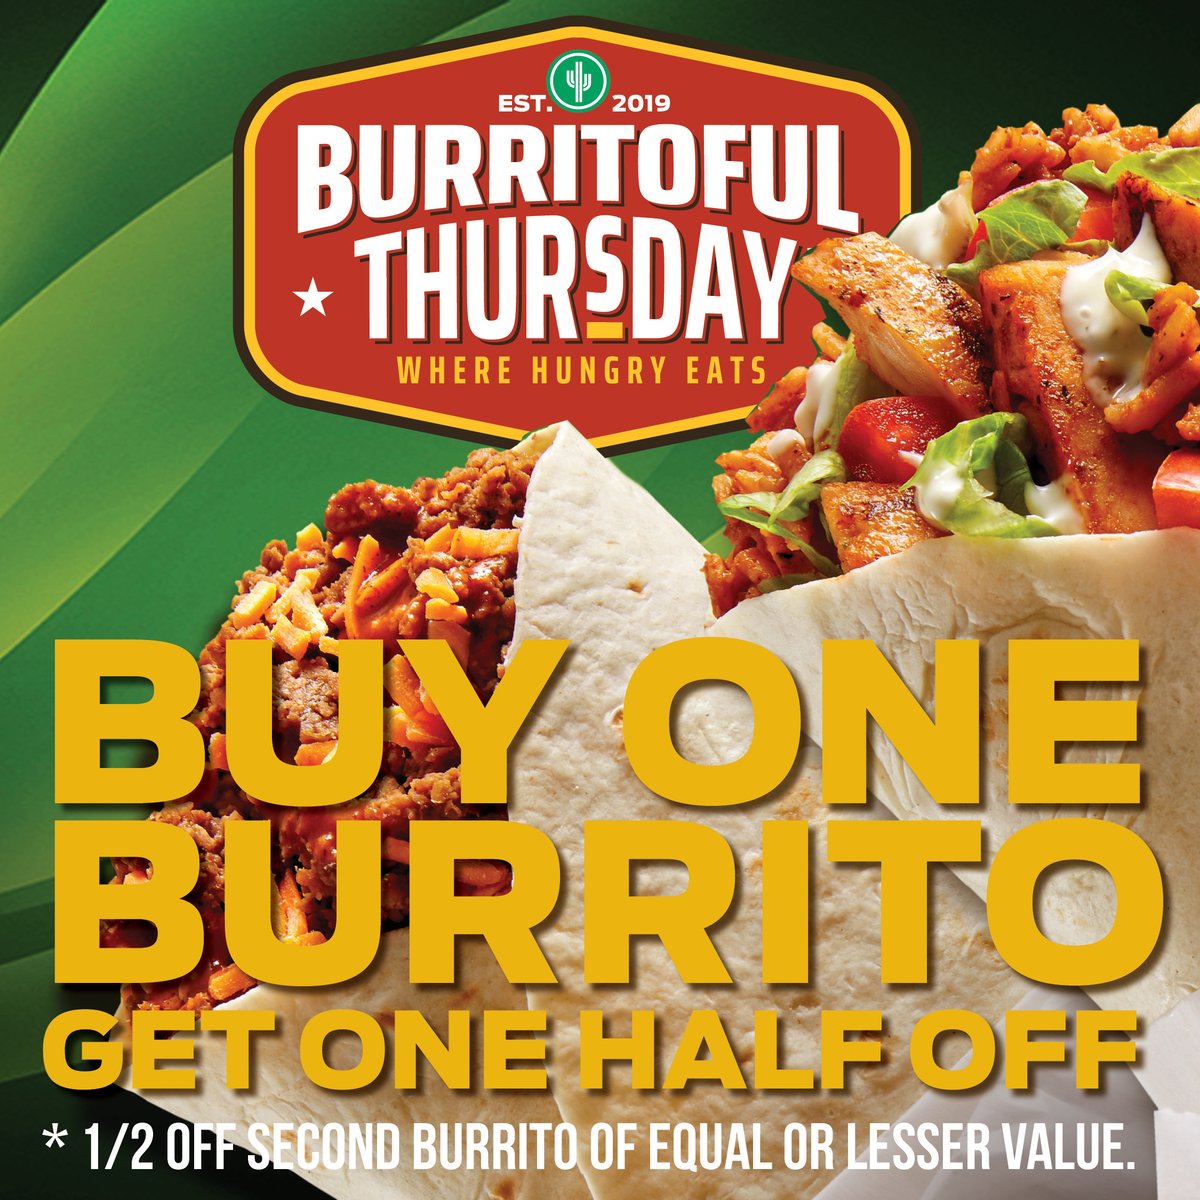 It’s another Burritoful Thursday!. Buy one burrito and get one at half off ! 🌯+🌯=🤗. ‘Where Hungry Eats!’